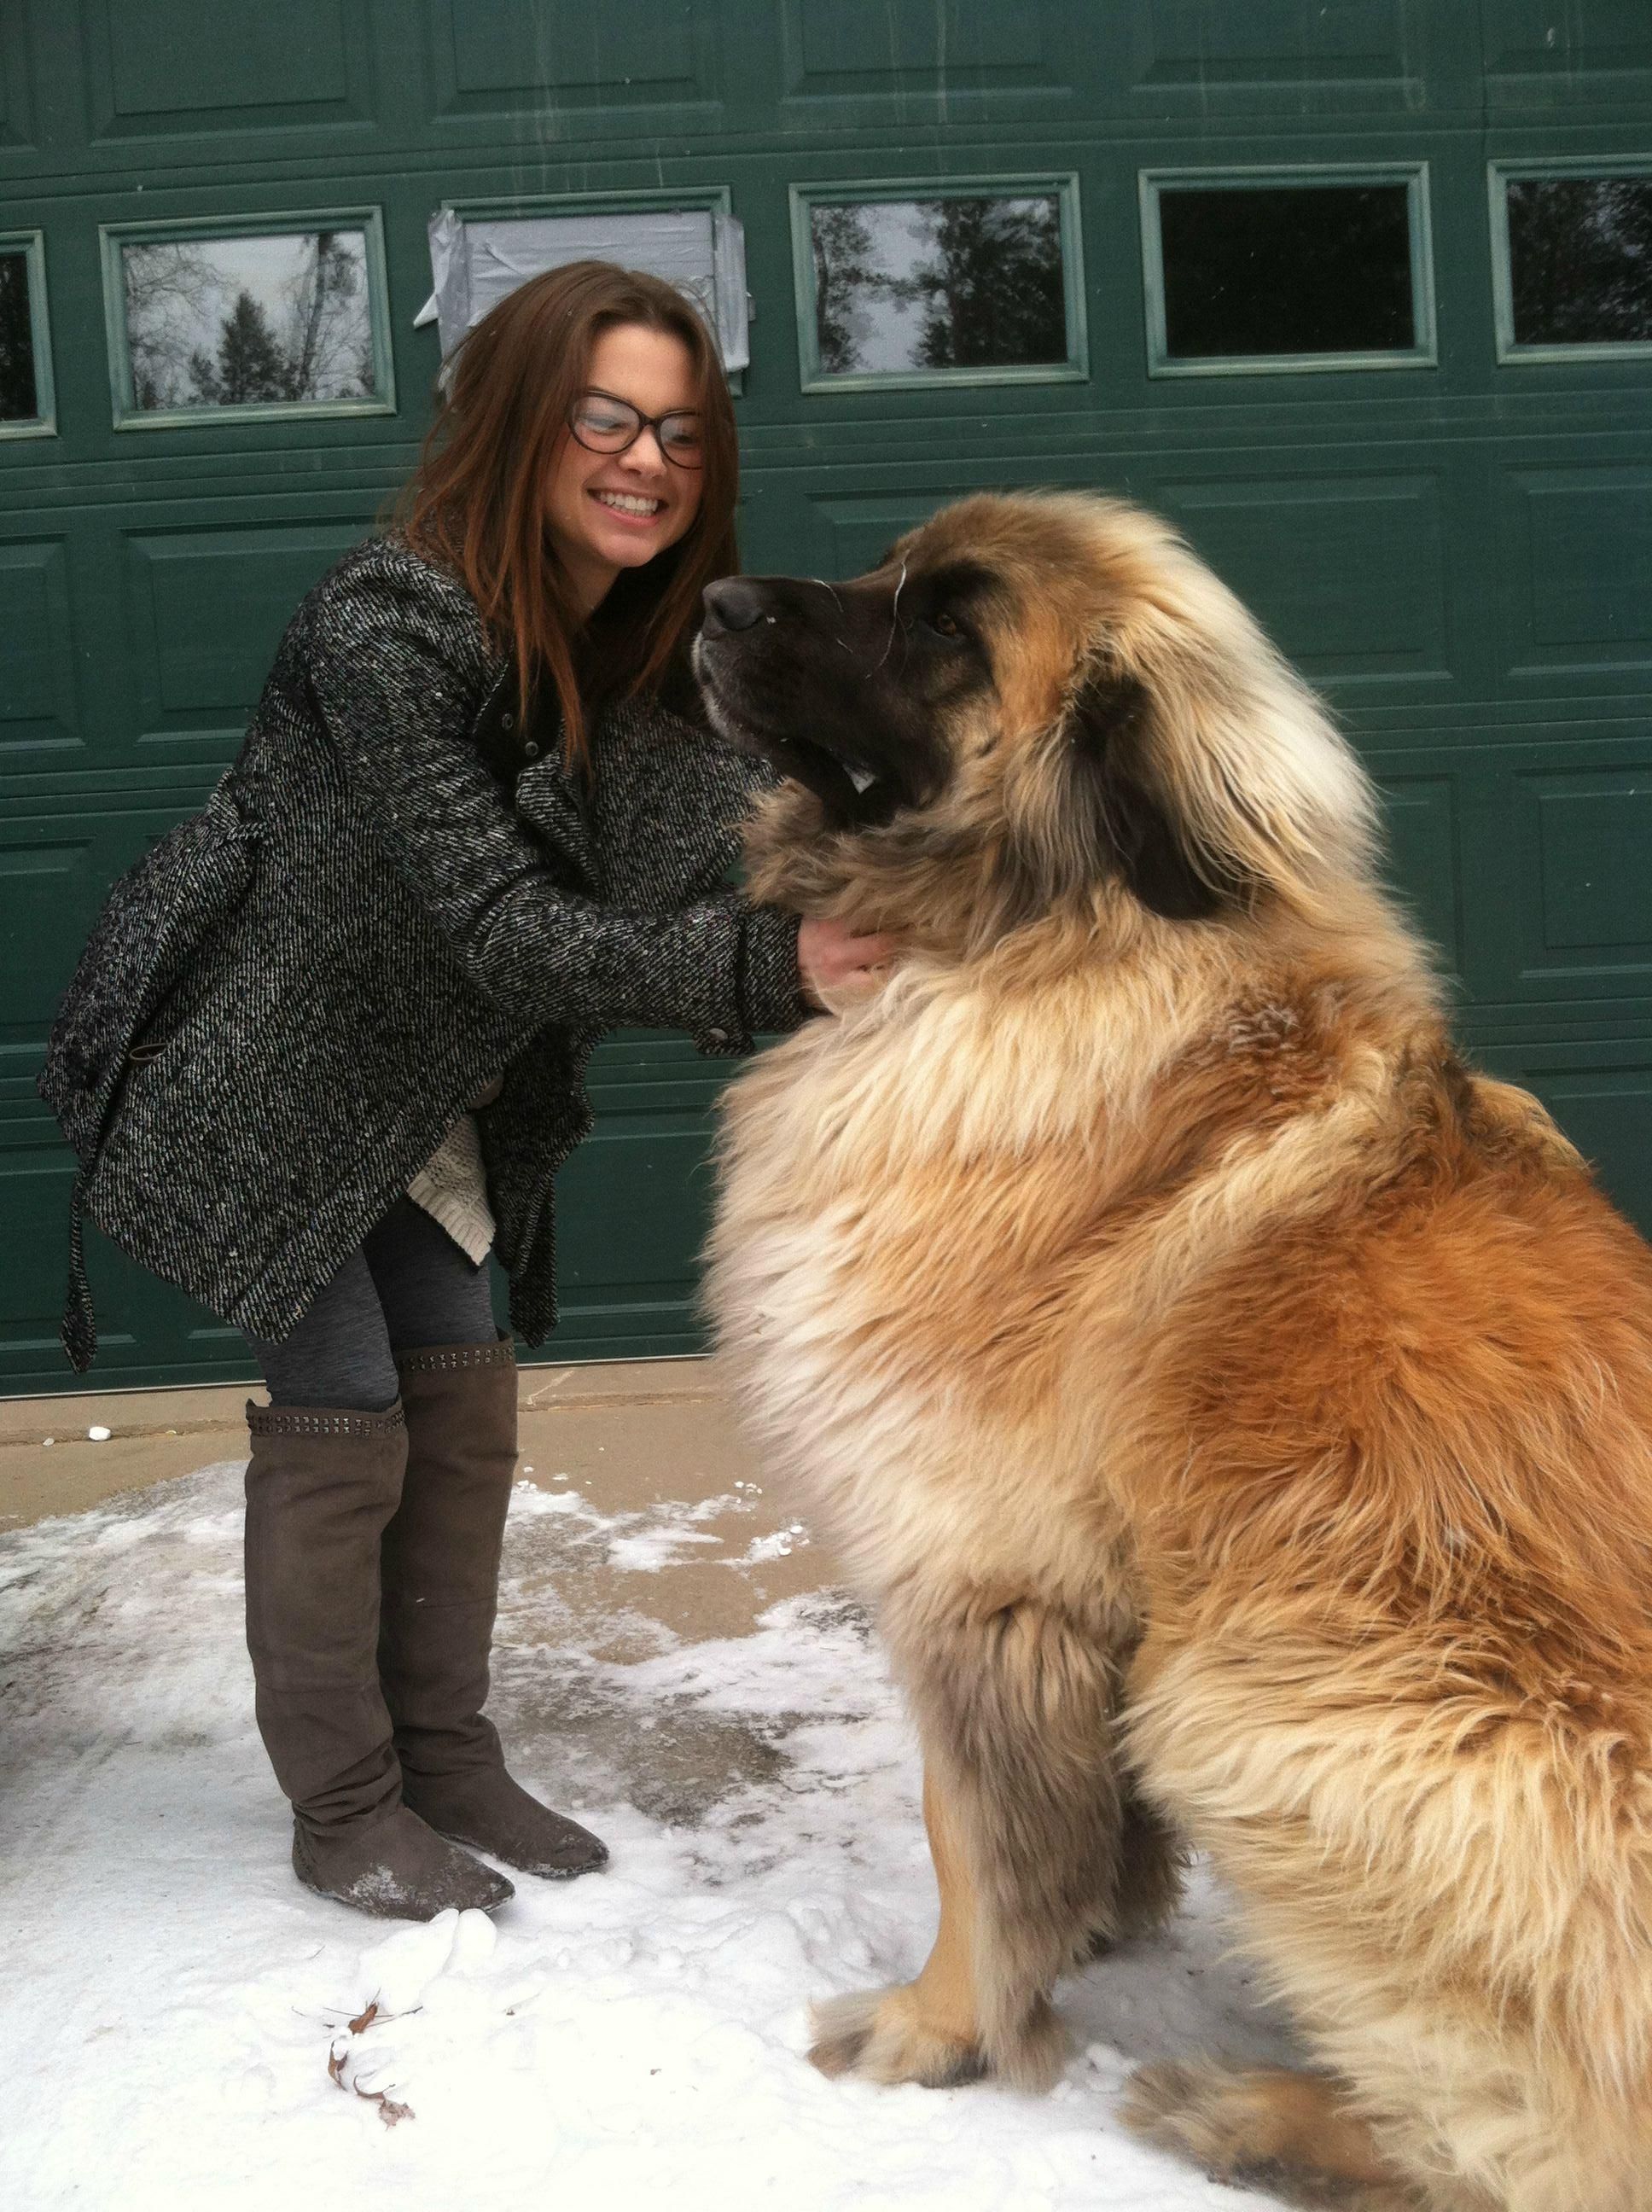 Meet Simba. Hes a Leonberger. Fun fact: After the second world war, there were only 8 of these in the entire world. Every single Leonberger today can be traced back to